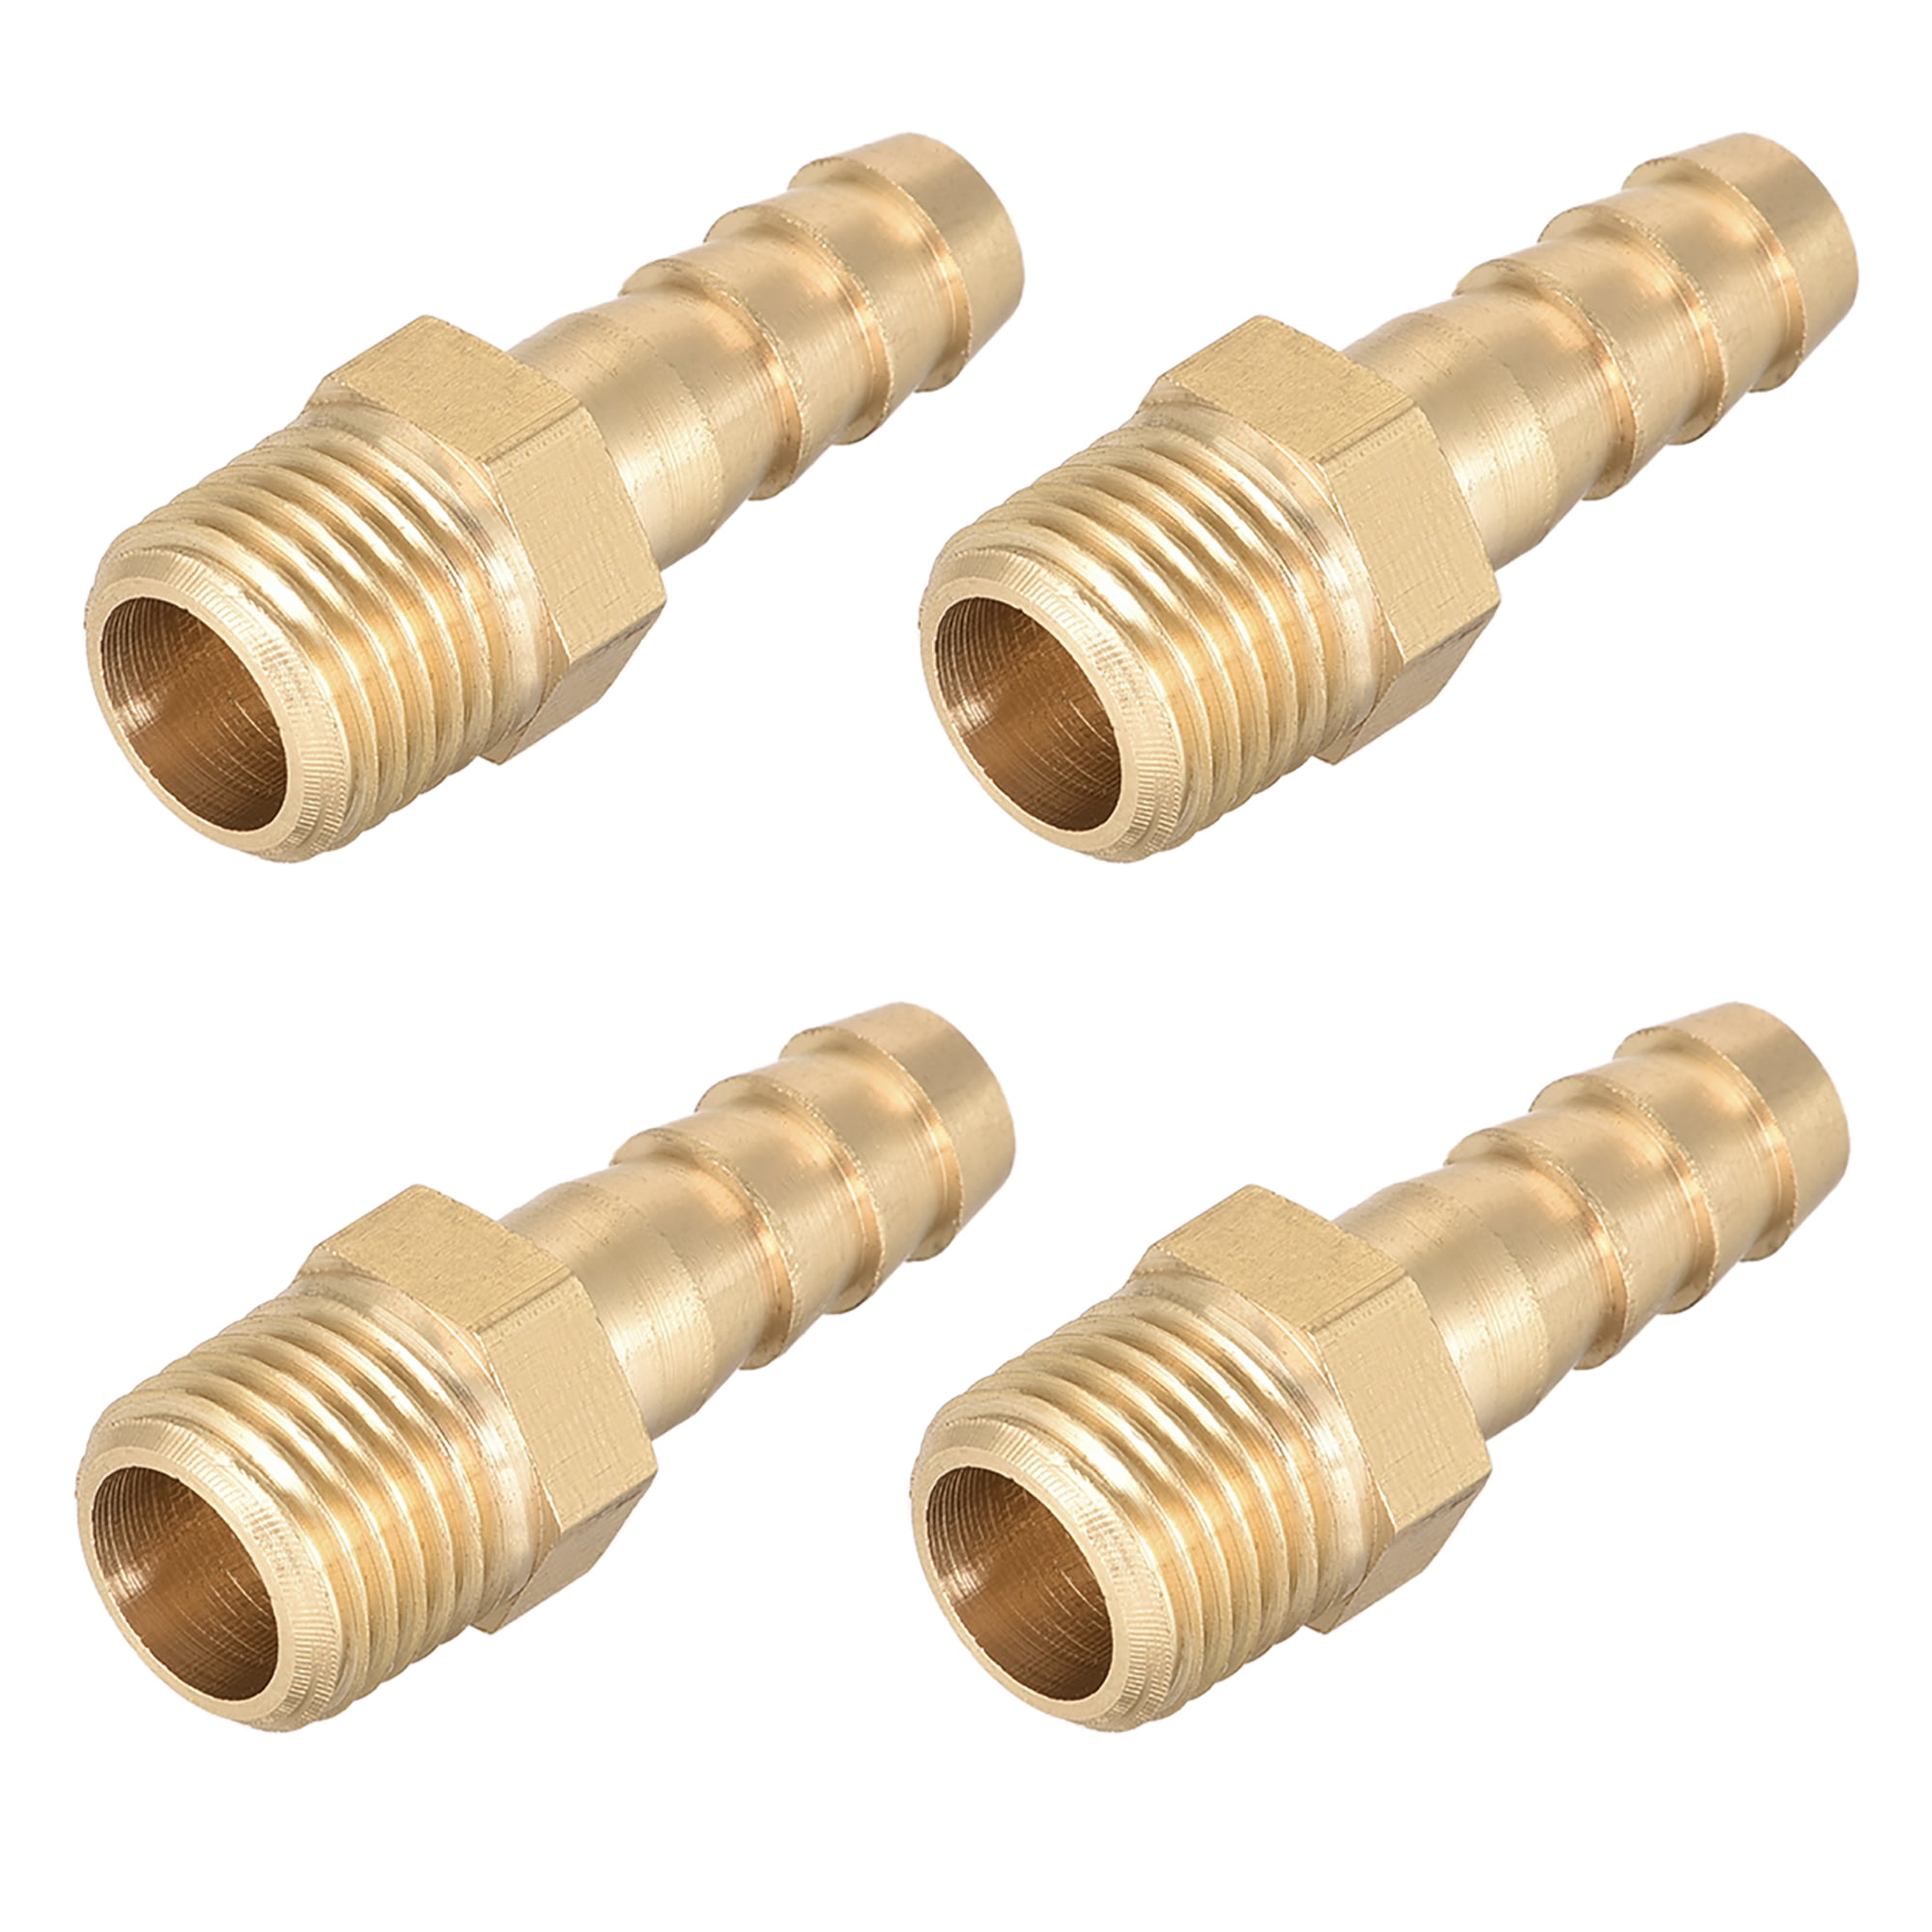 10pcs Brass Barb Fitting Cross Connector For Hose ID 10mm（3/8”）